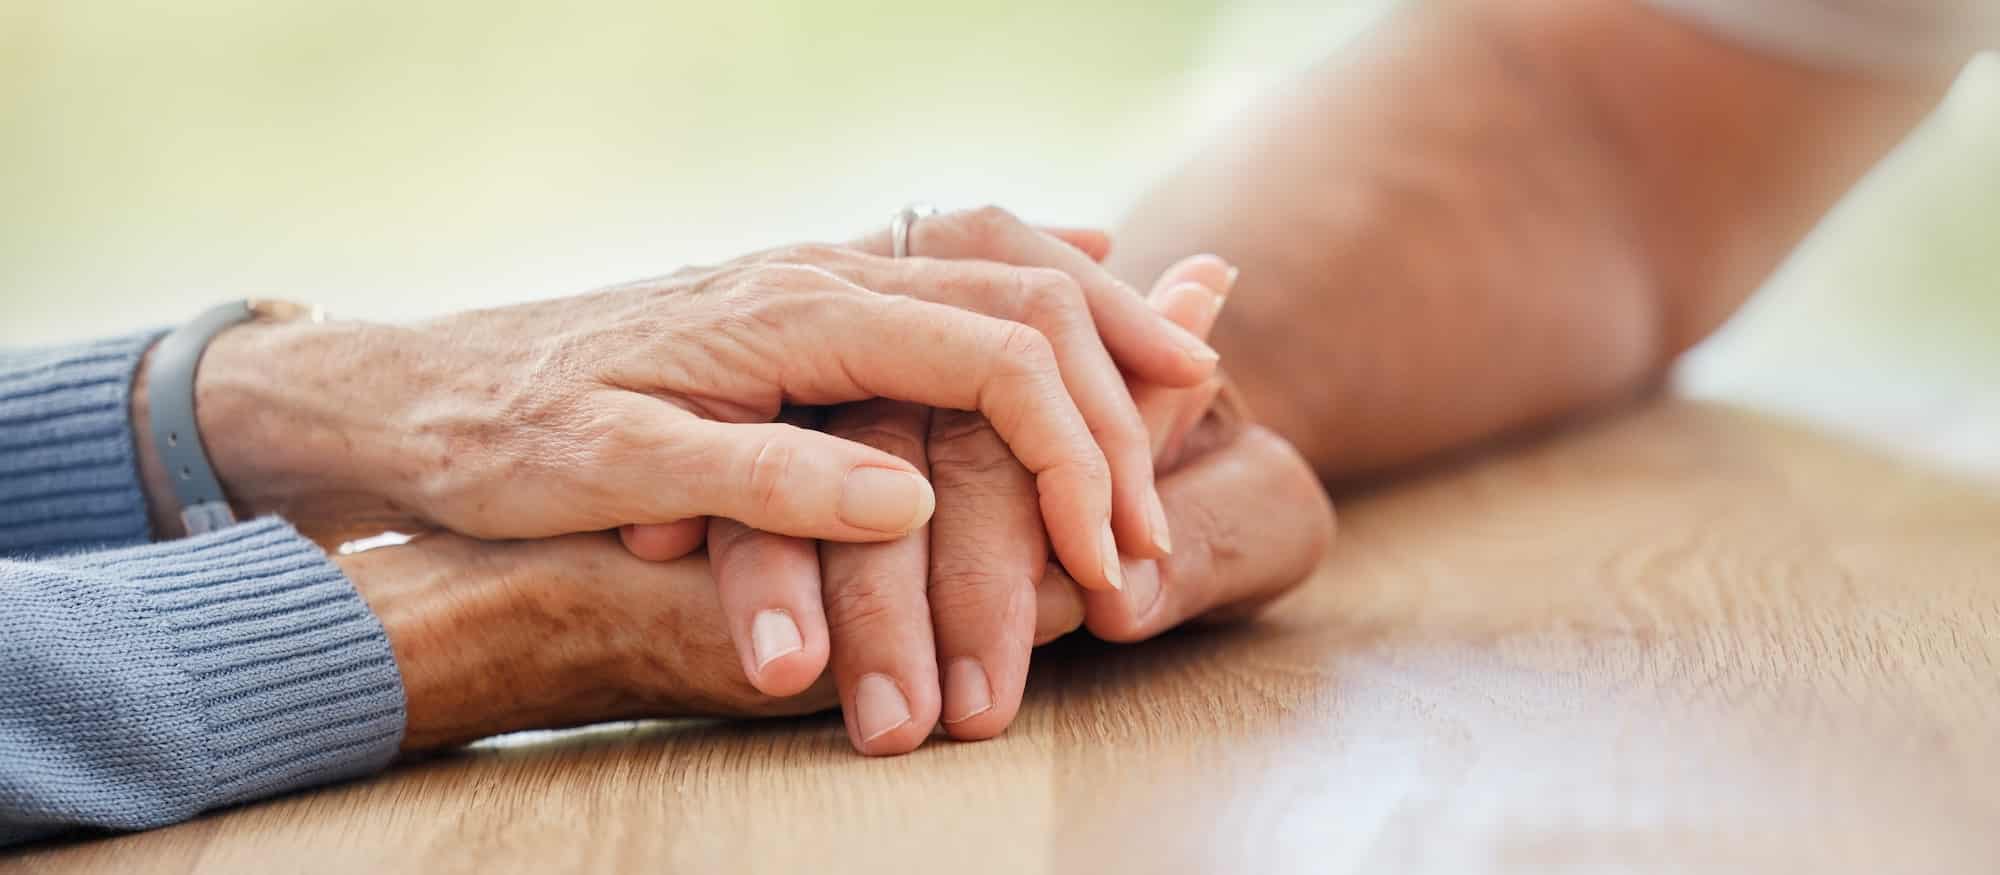 Senior, holding hands and support with couple, comfort and help on table for grief, pain or sympath